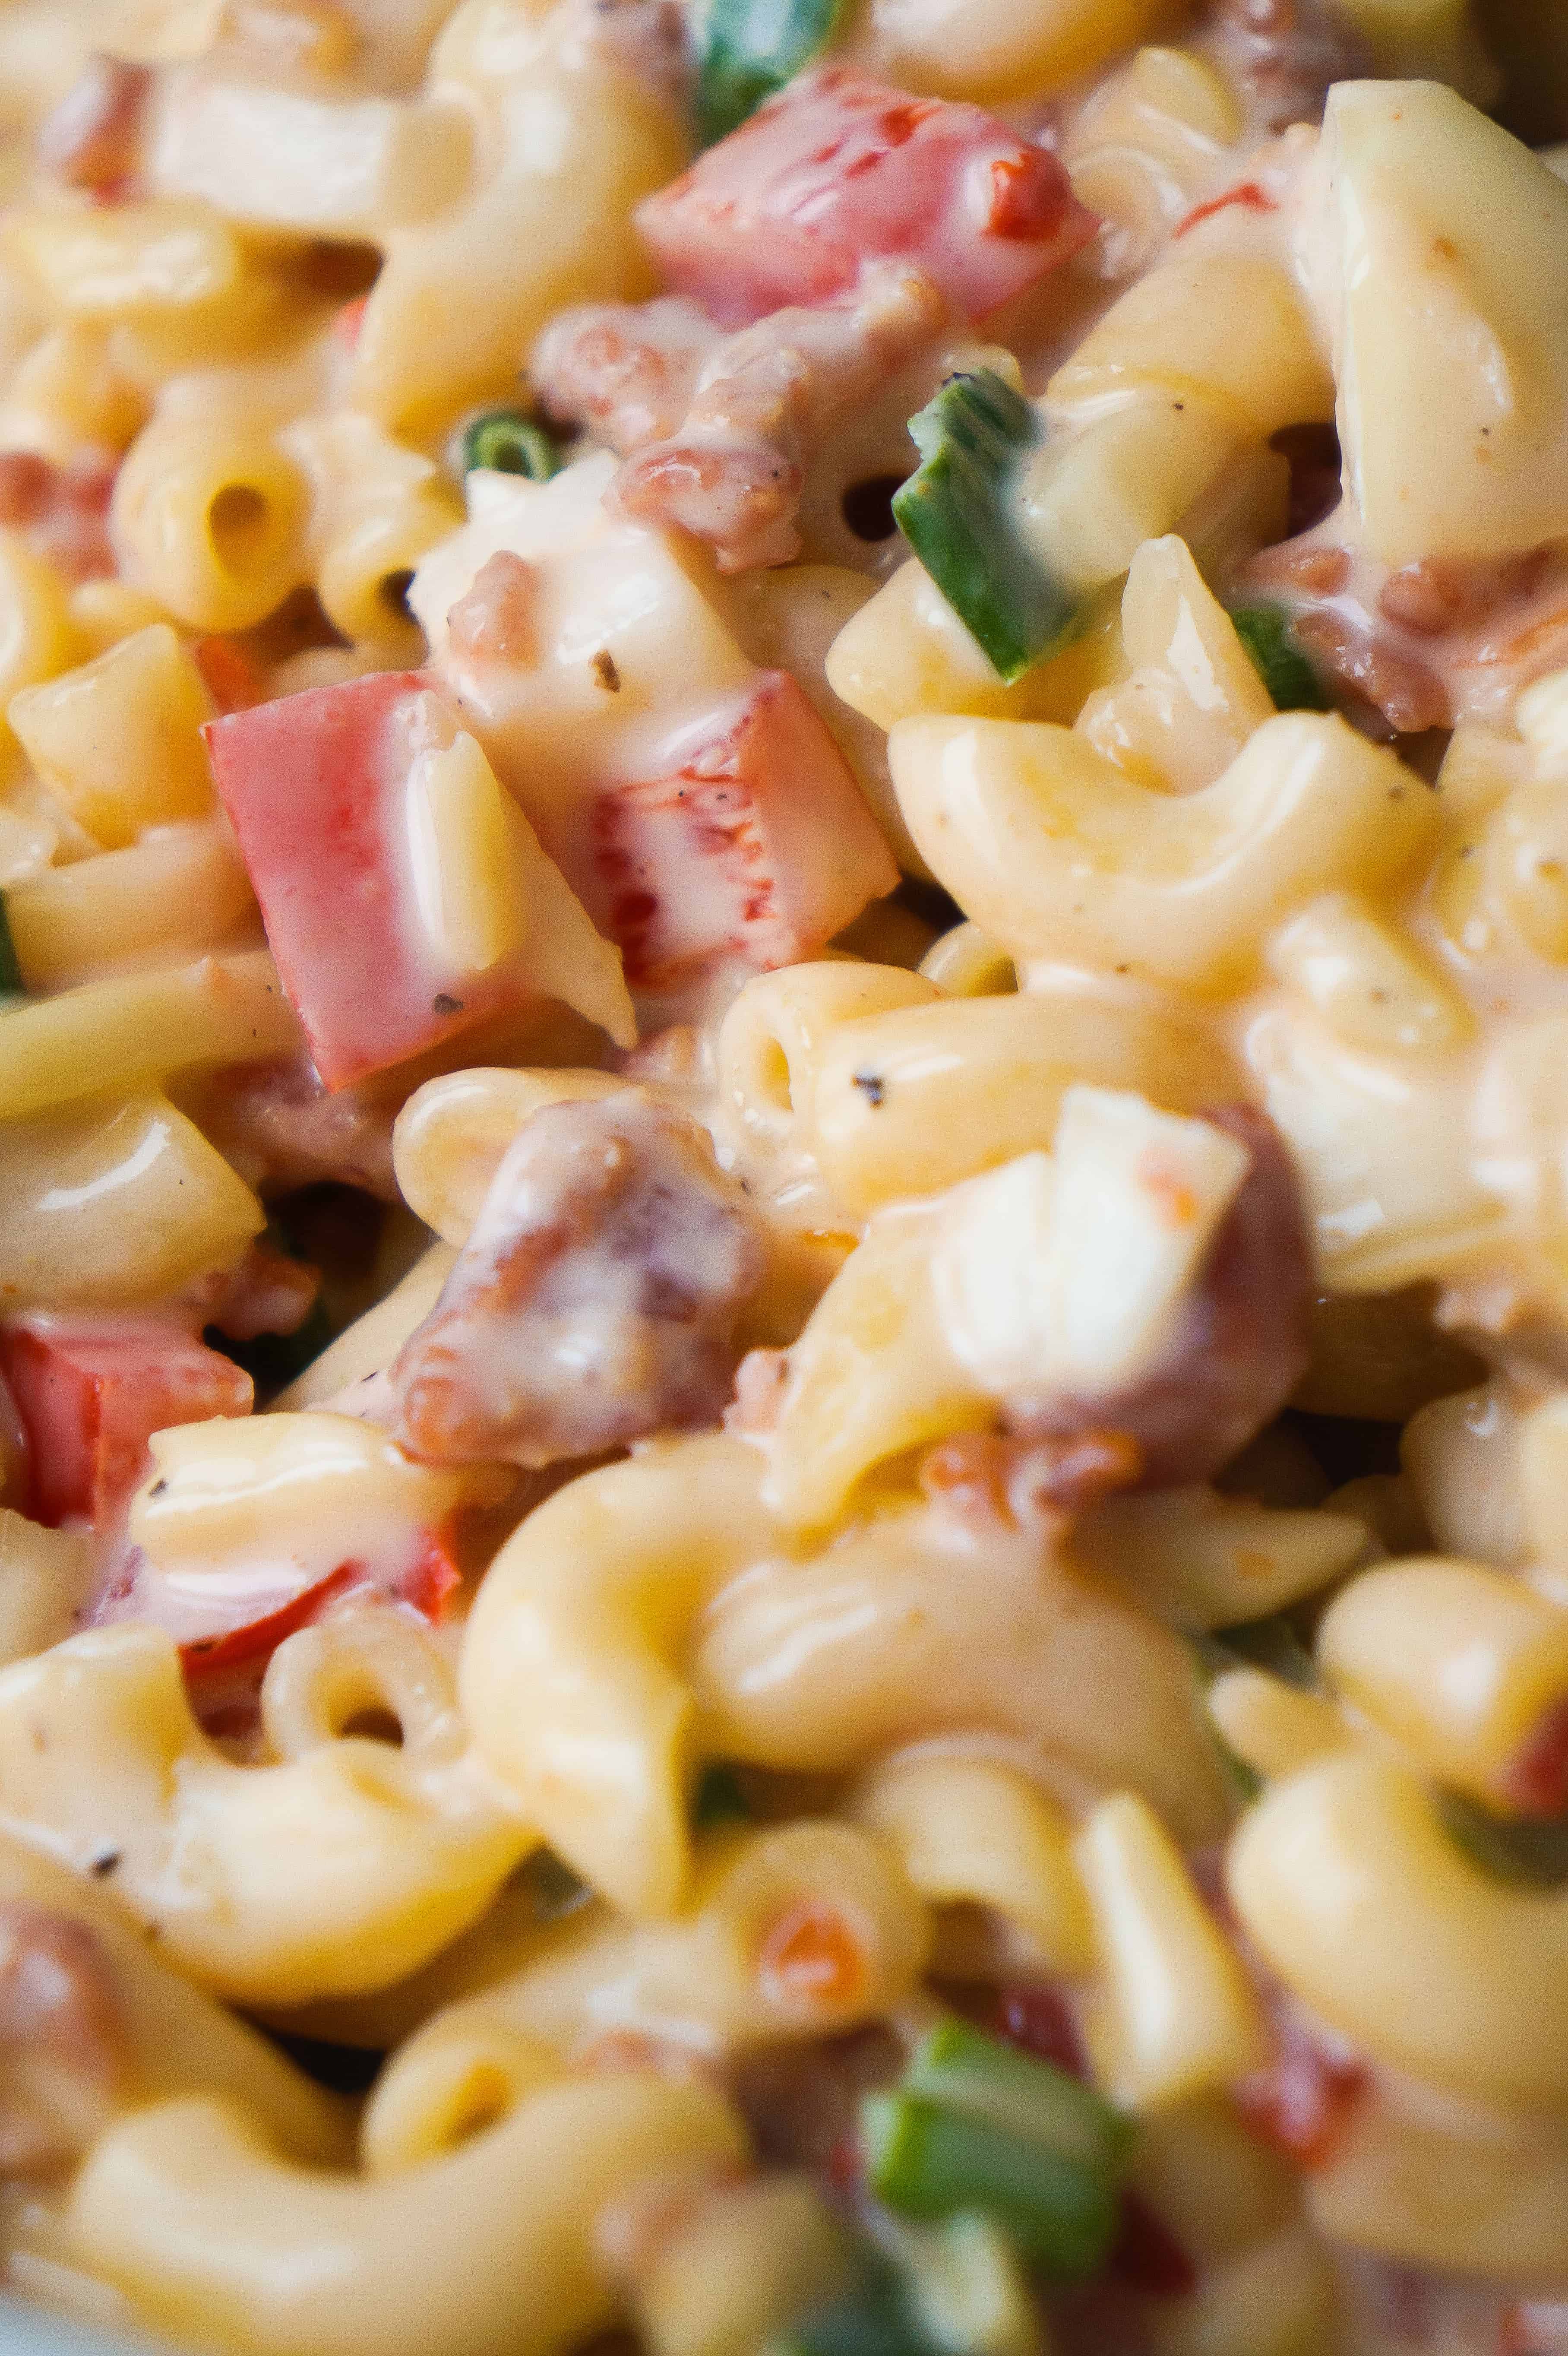 Sweet Chili Bacon Pasta Salad is the perfect side dish for potluck parties. This cold macaroni salad loaded with bacon, red peppers and green onions is tossed in a sweet and spicy sauce. This is an easy BBQ side dish recipe.